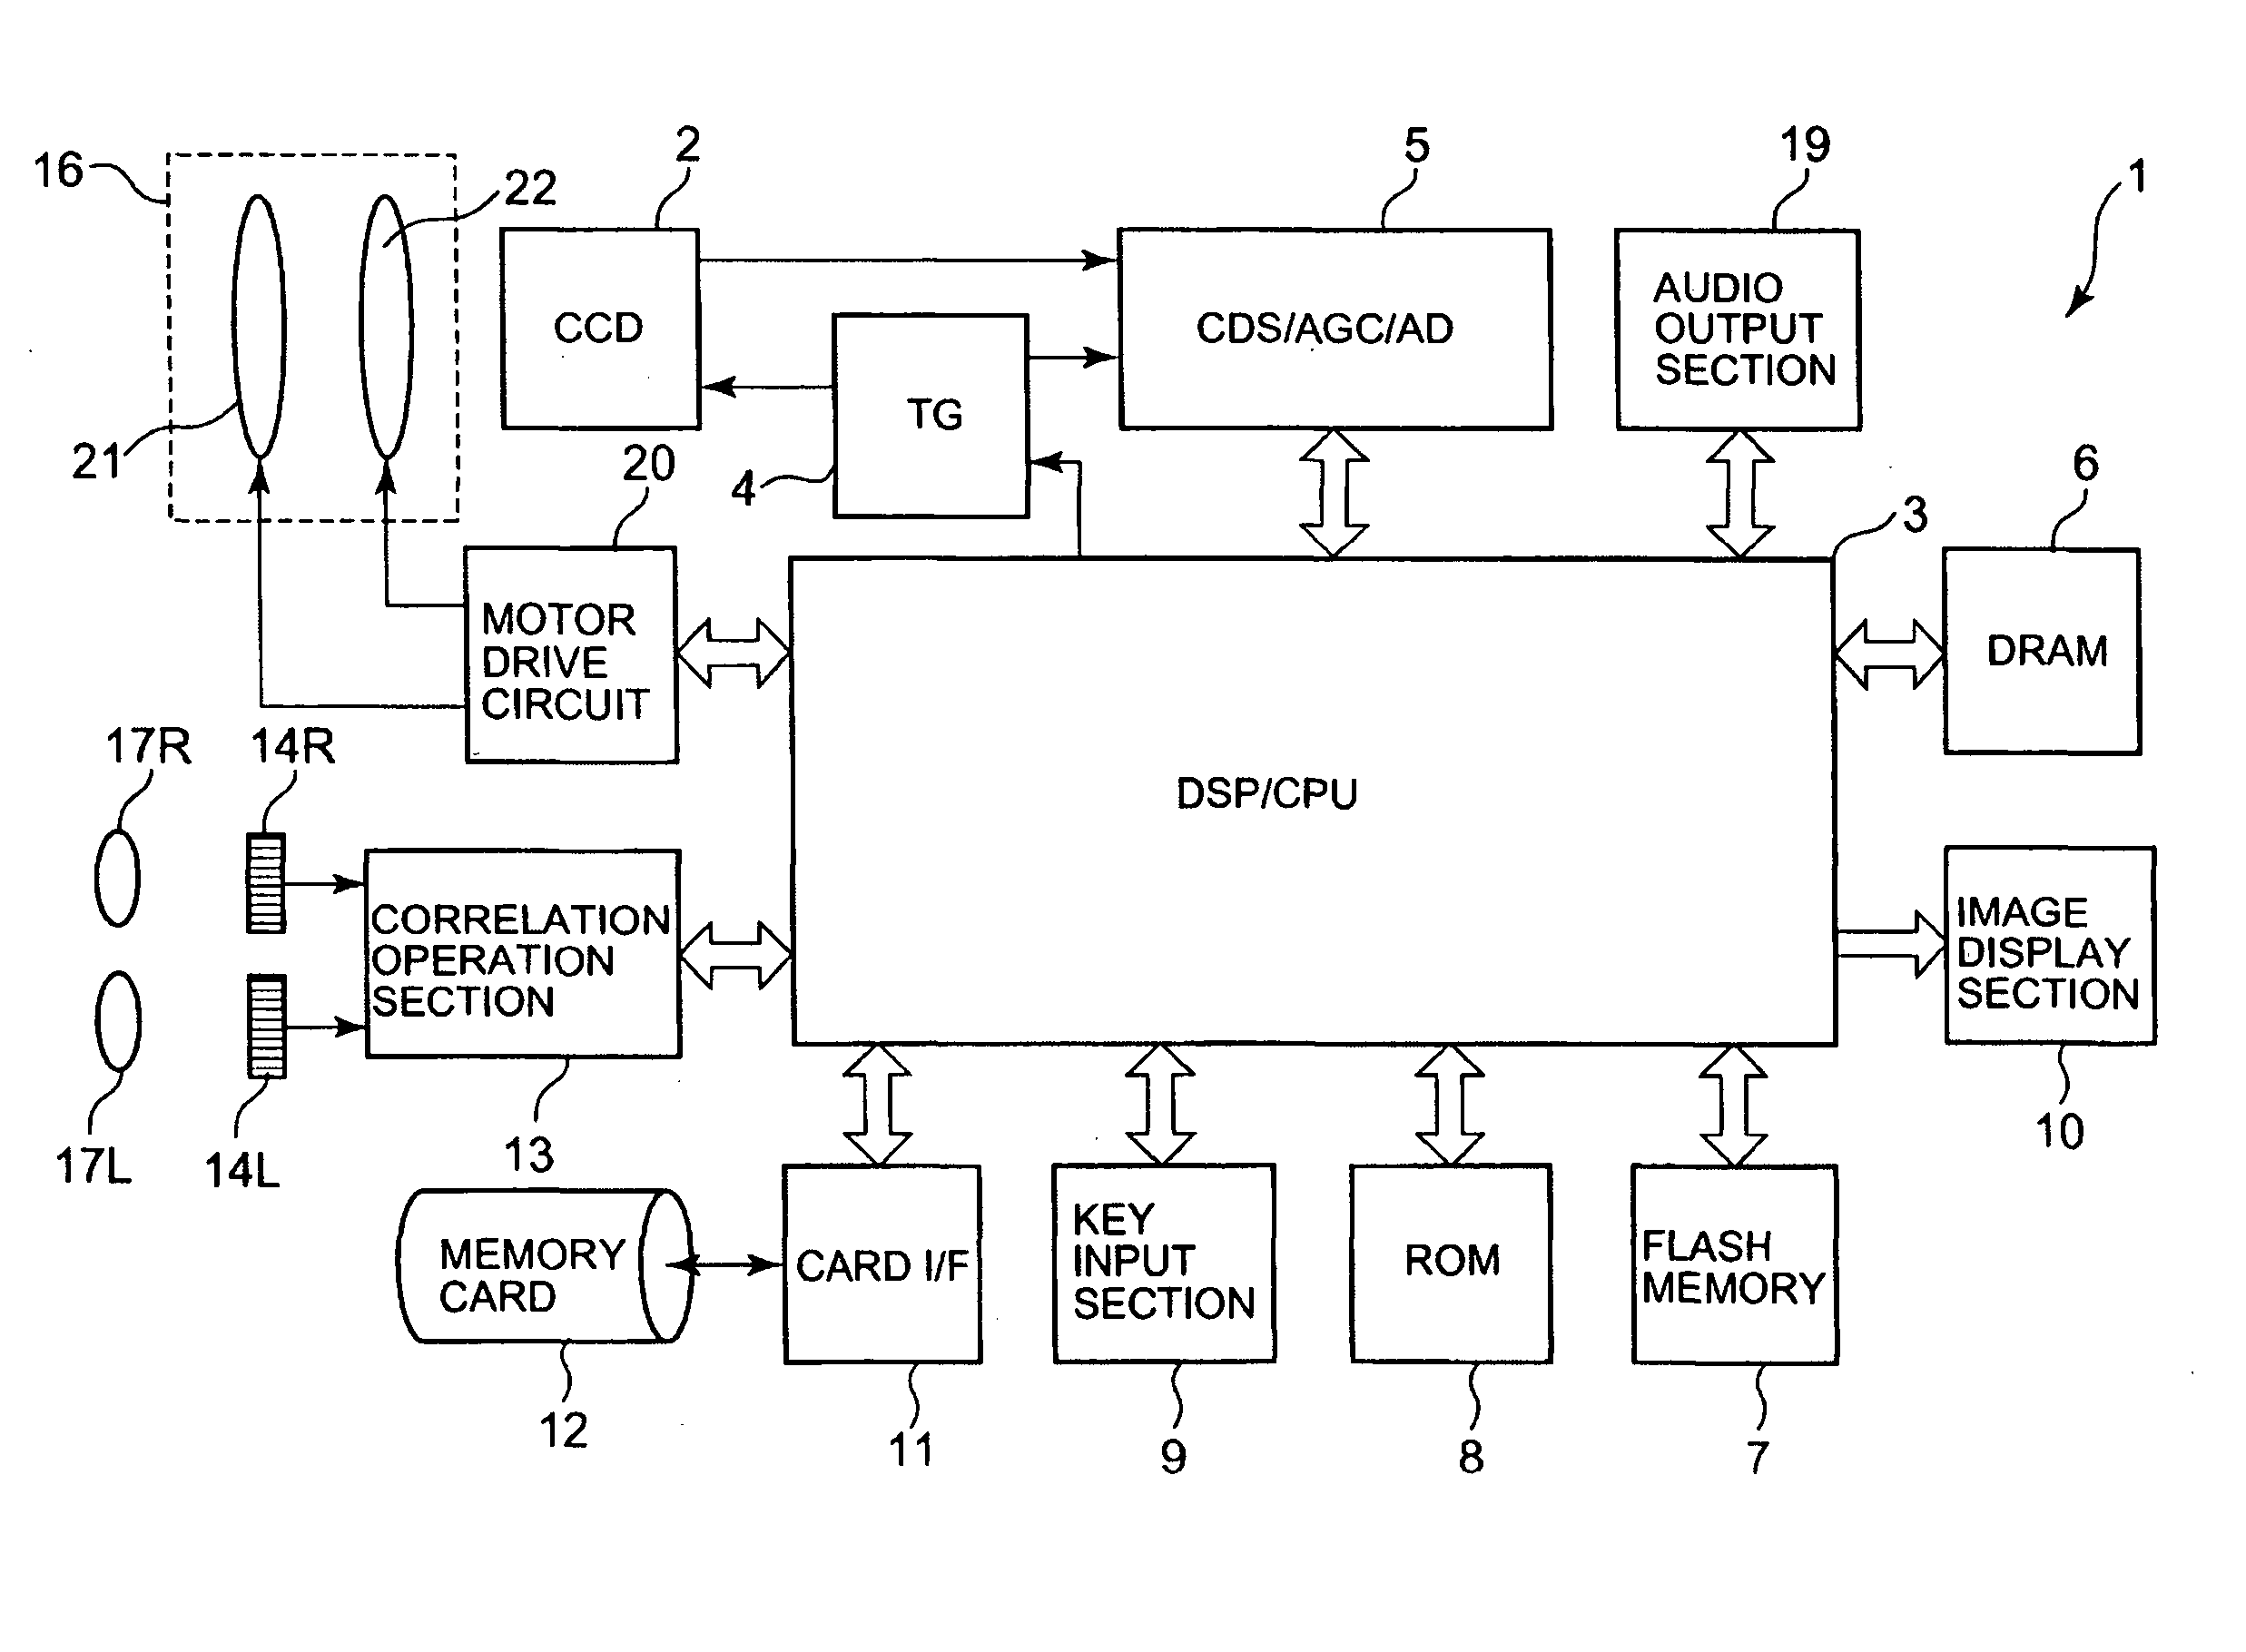 Electronic camera equipped with an automatic focusing function